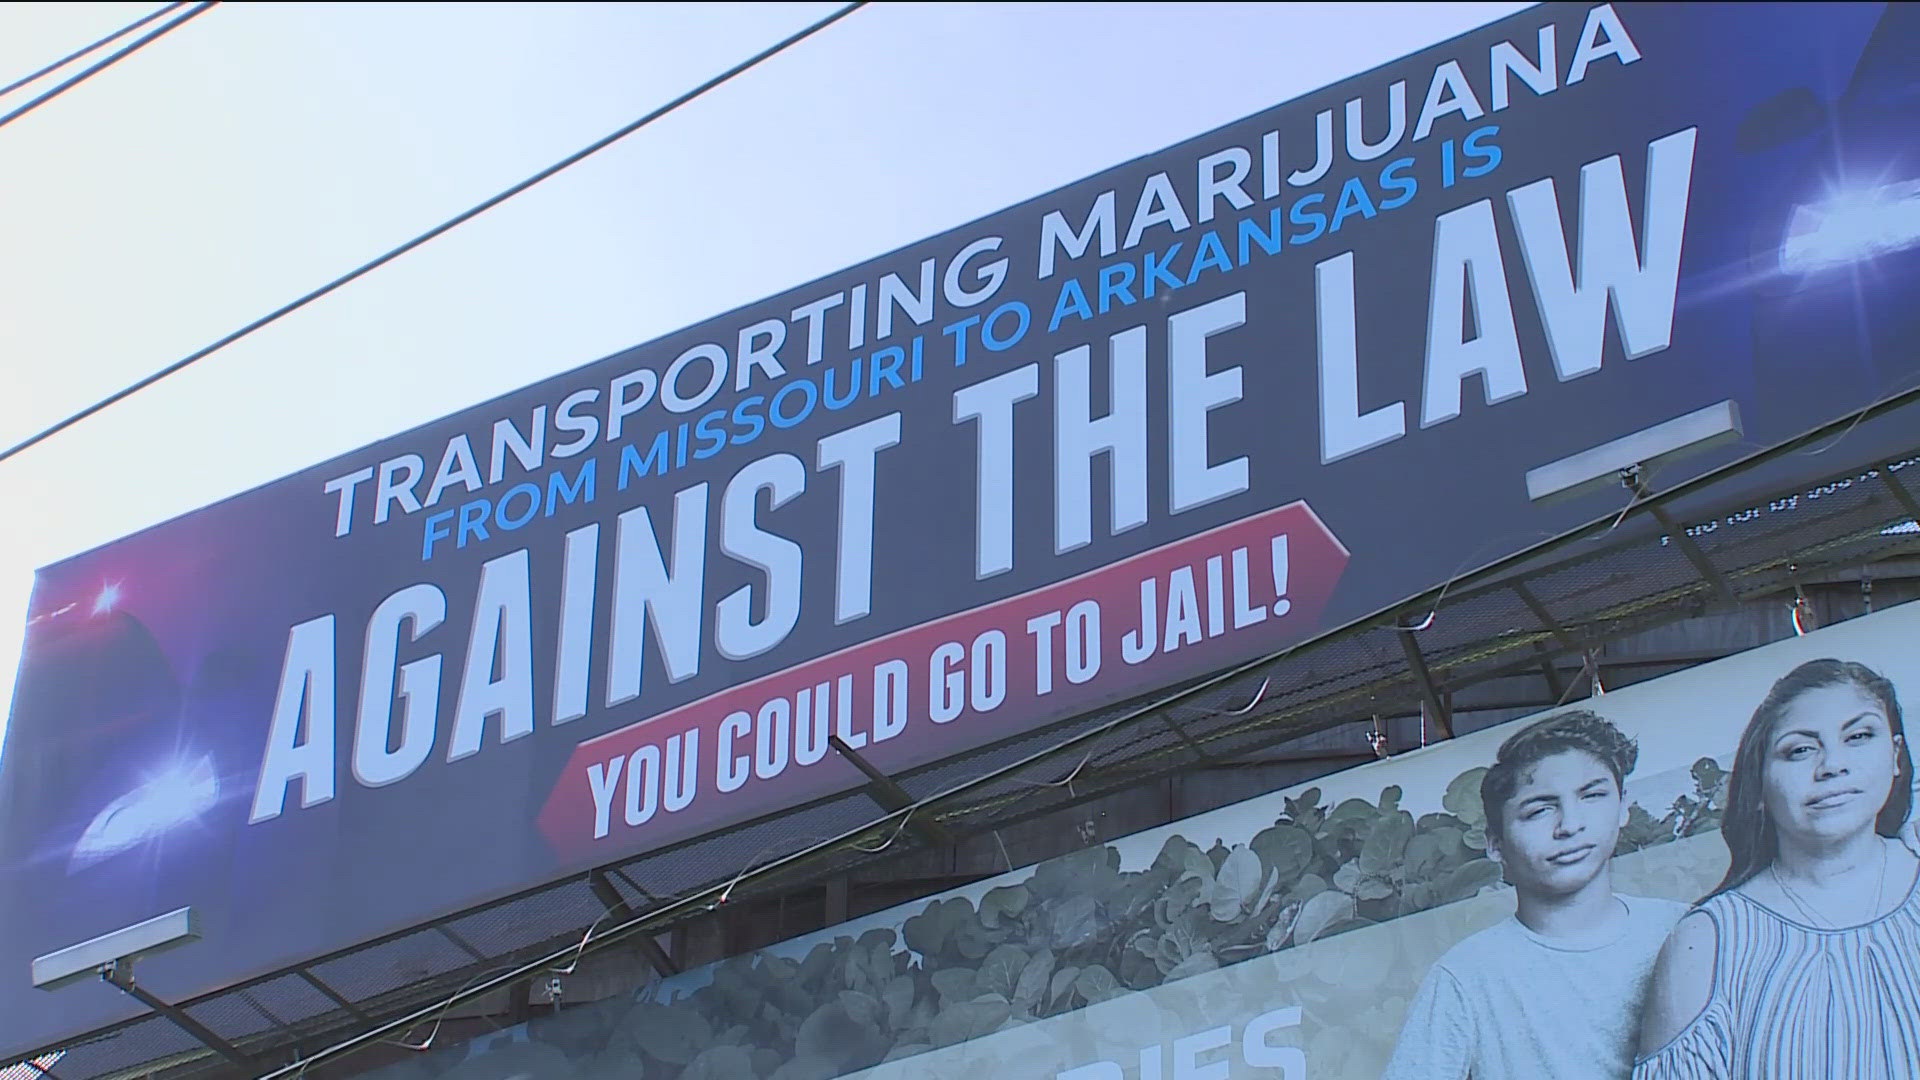 AN LLC HAS PLACED BILLBOARDS ALONG I-49 IN NORTHWEST ARKANSAS – ENCOURAGING DRIVERS TO NOT BRING MARIJUANA TO ARKANSAS FROM MISSOURI...